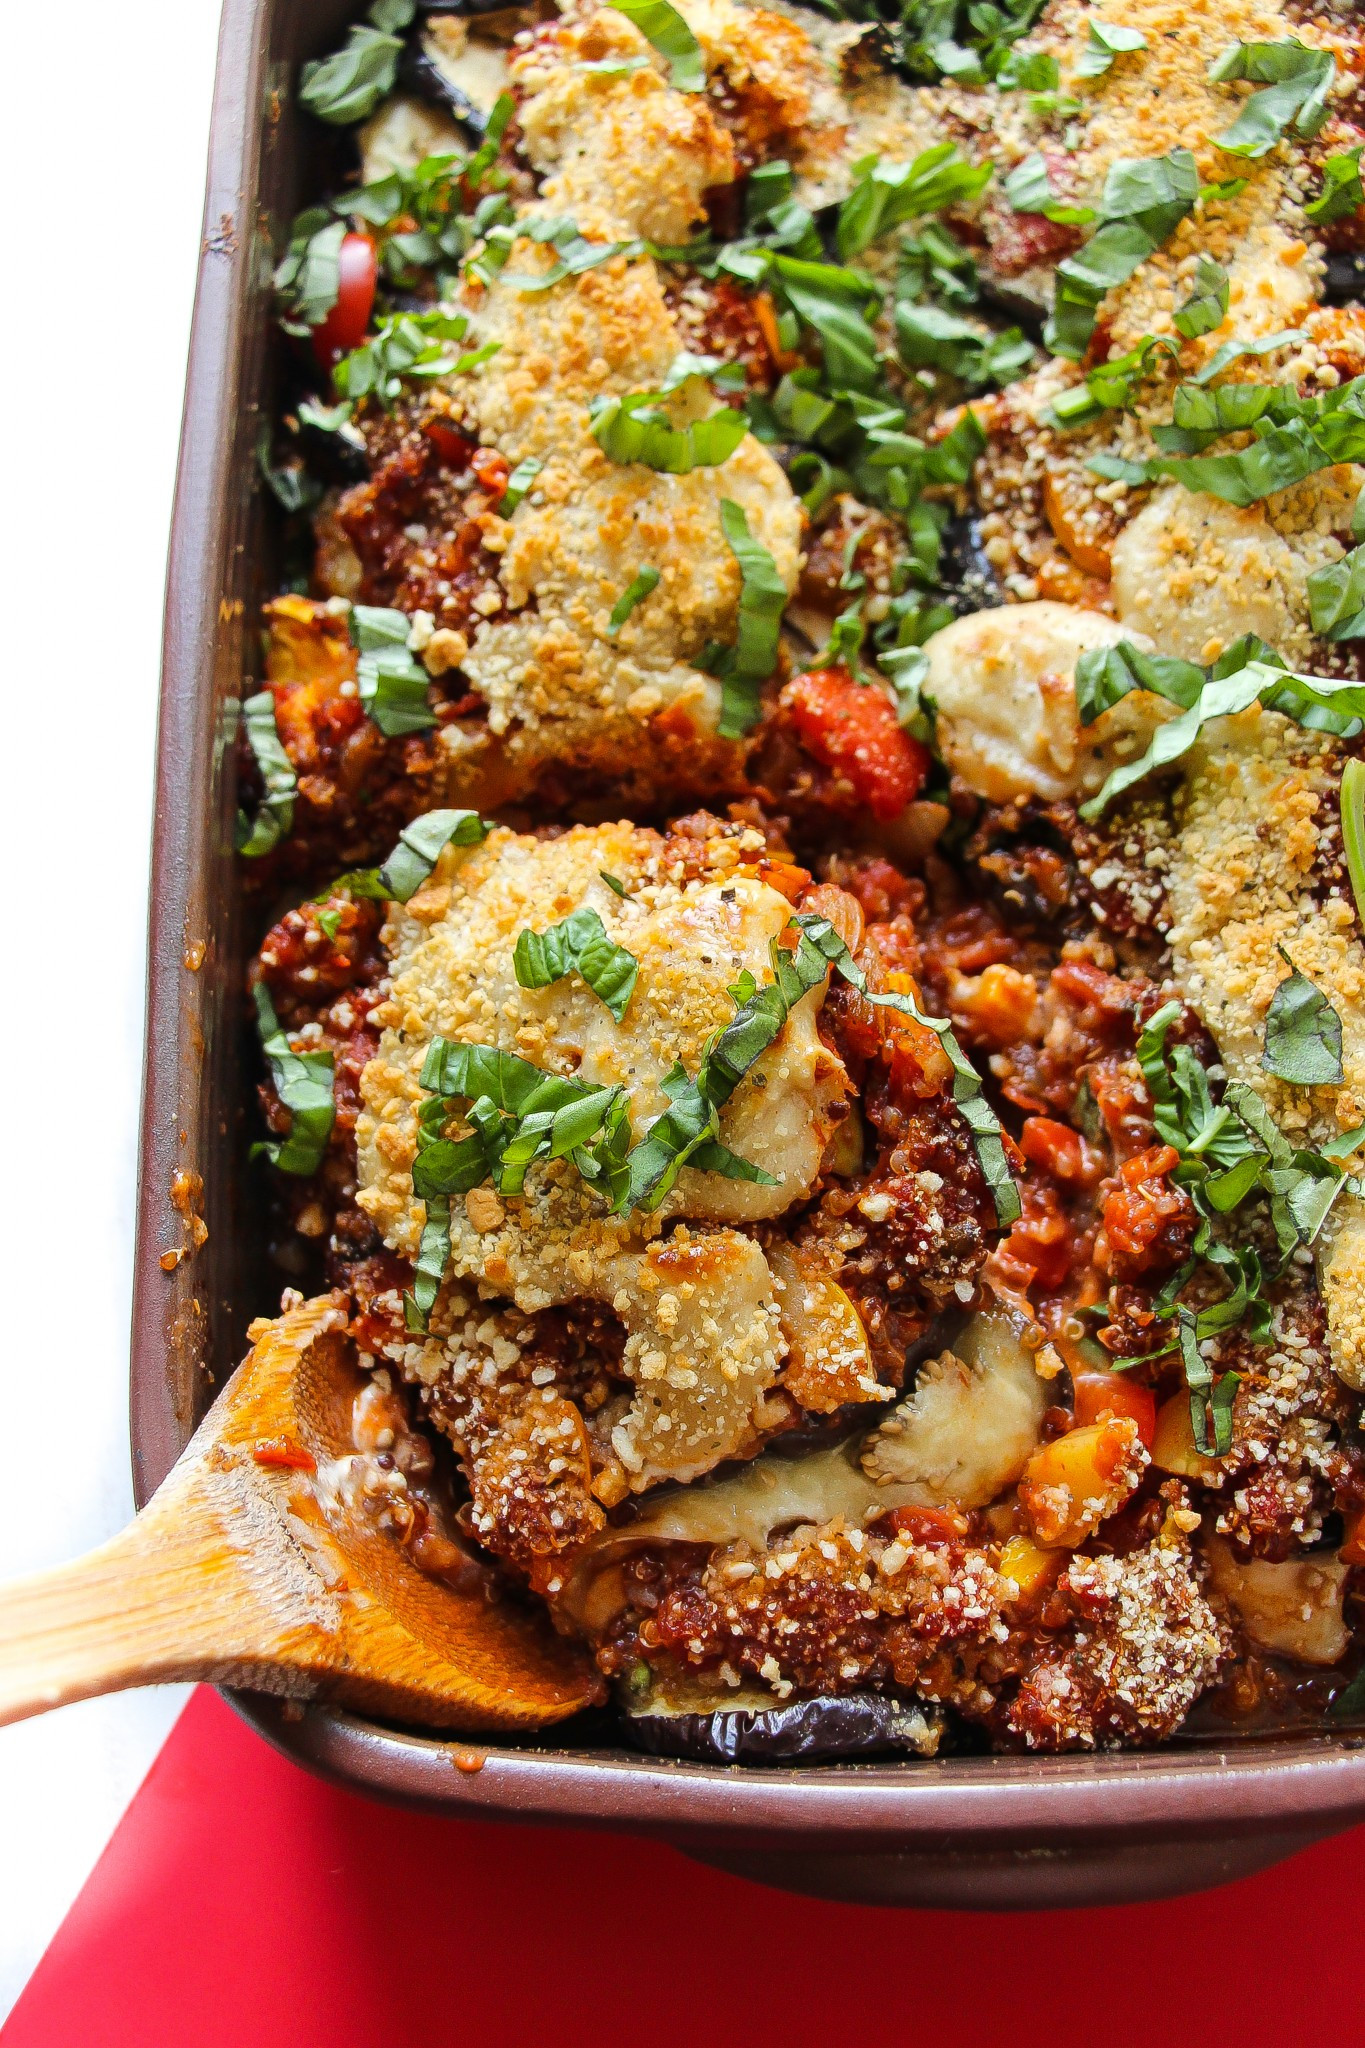 Healthy Eggplant Recipes For Dinner
 Vegan Eggplant Parmesan Bake Layers of Happiness